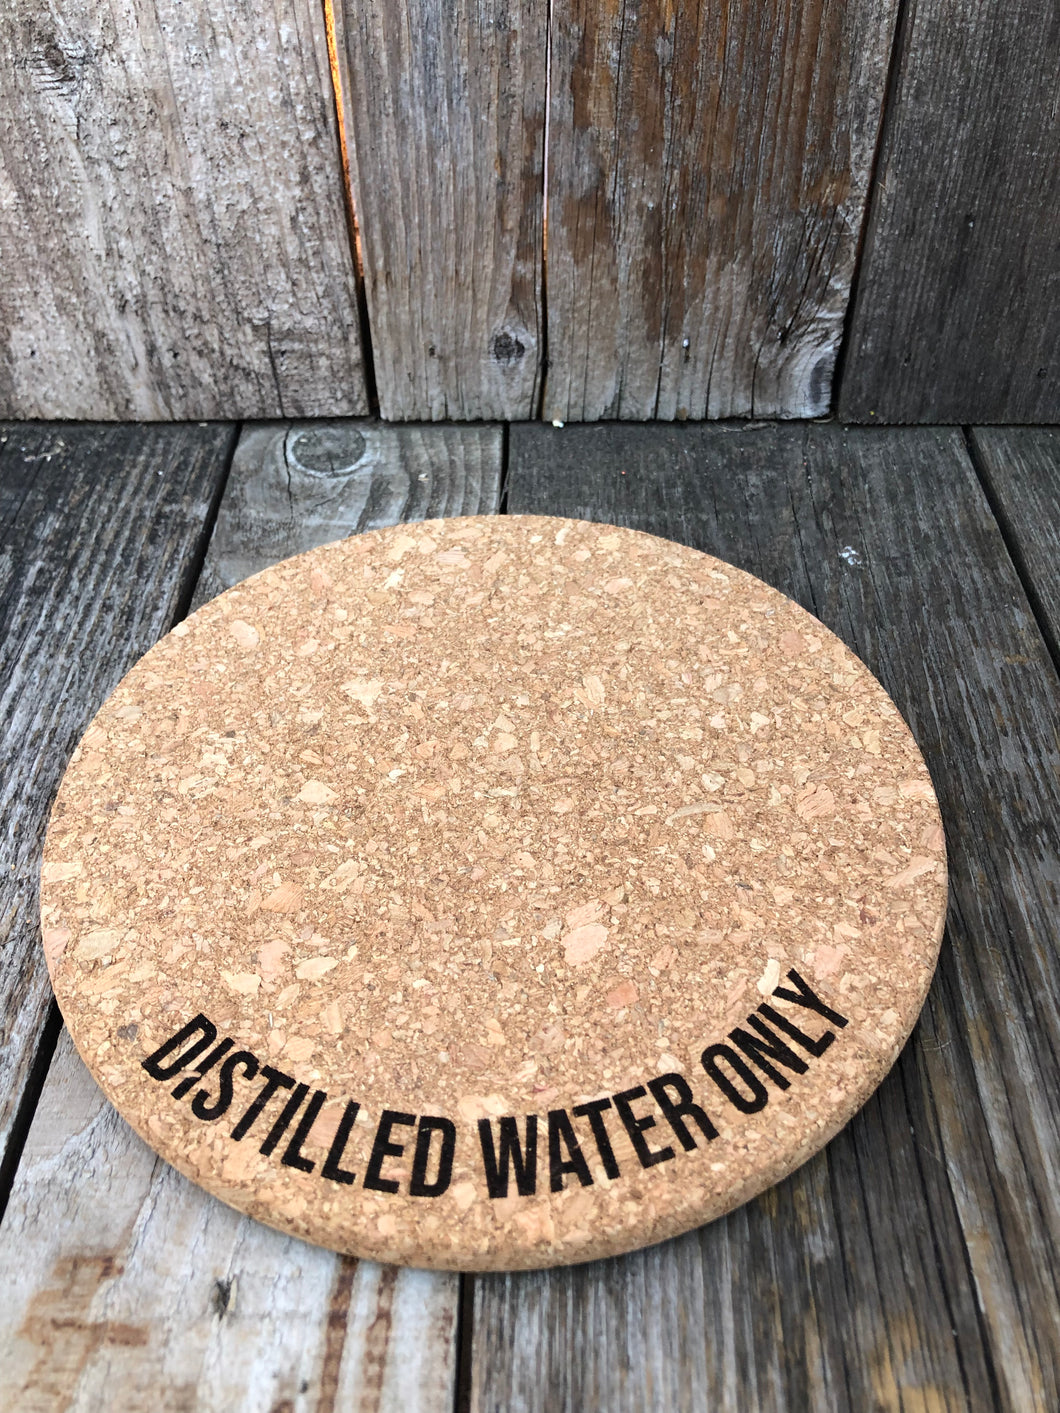 Distilled Water Only Plant Mat - Engraved Cork Round - Cork Bottom - No Plastic or Rubber - All Natural Material